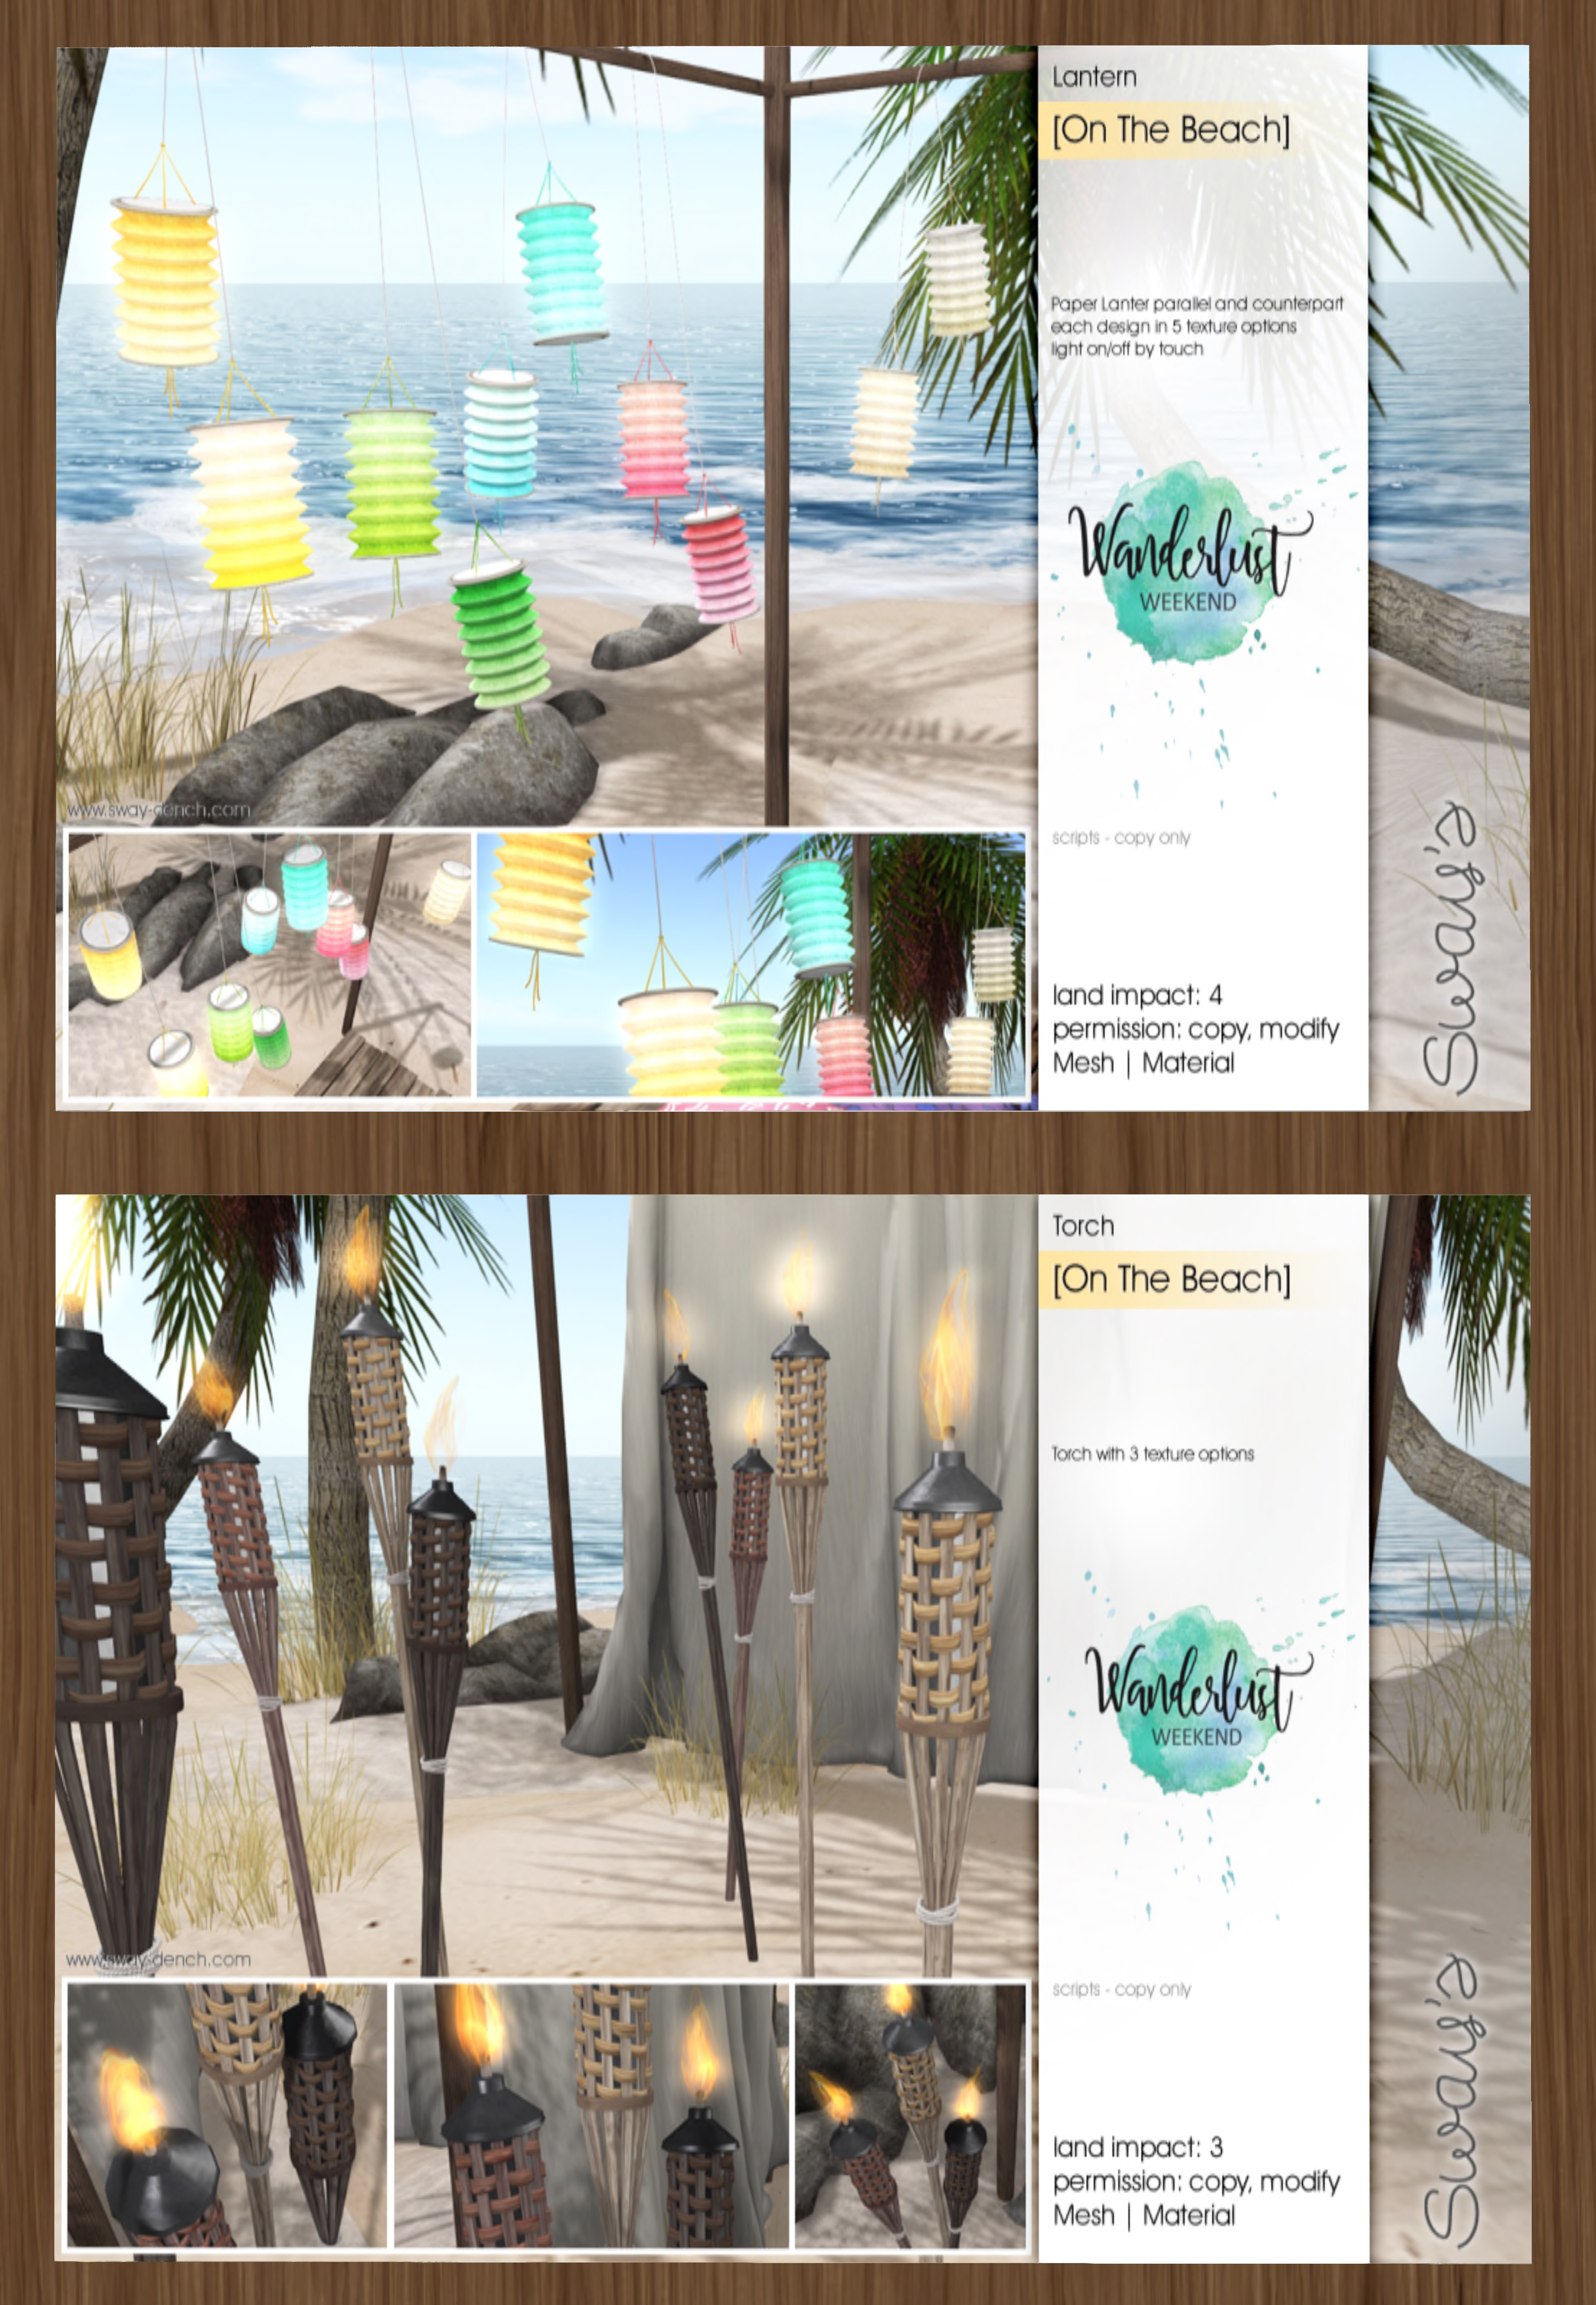 Sway’s – On the Beach Lanterns and Torches